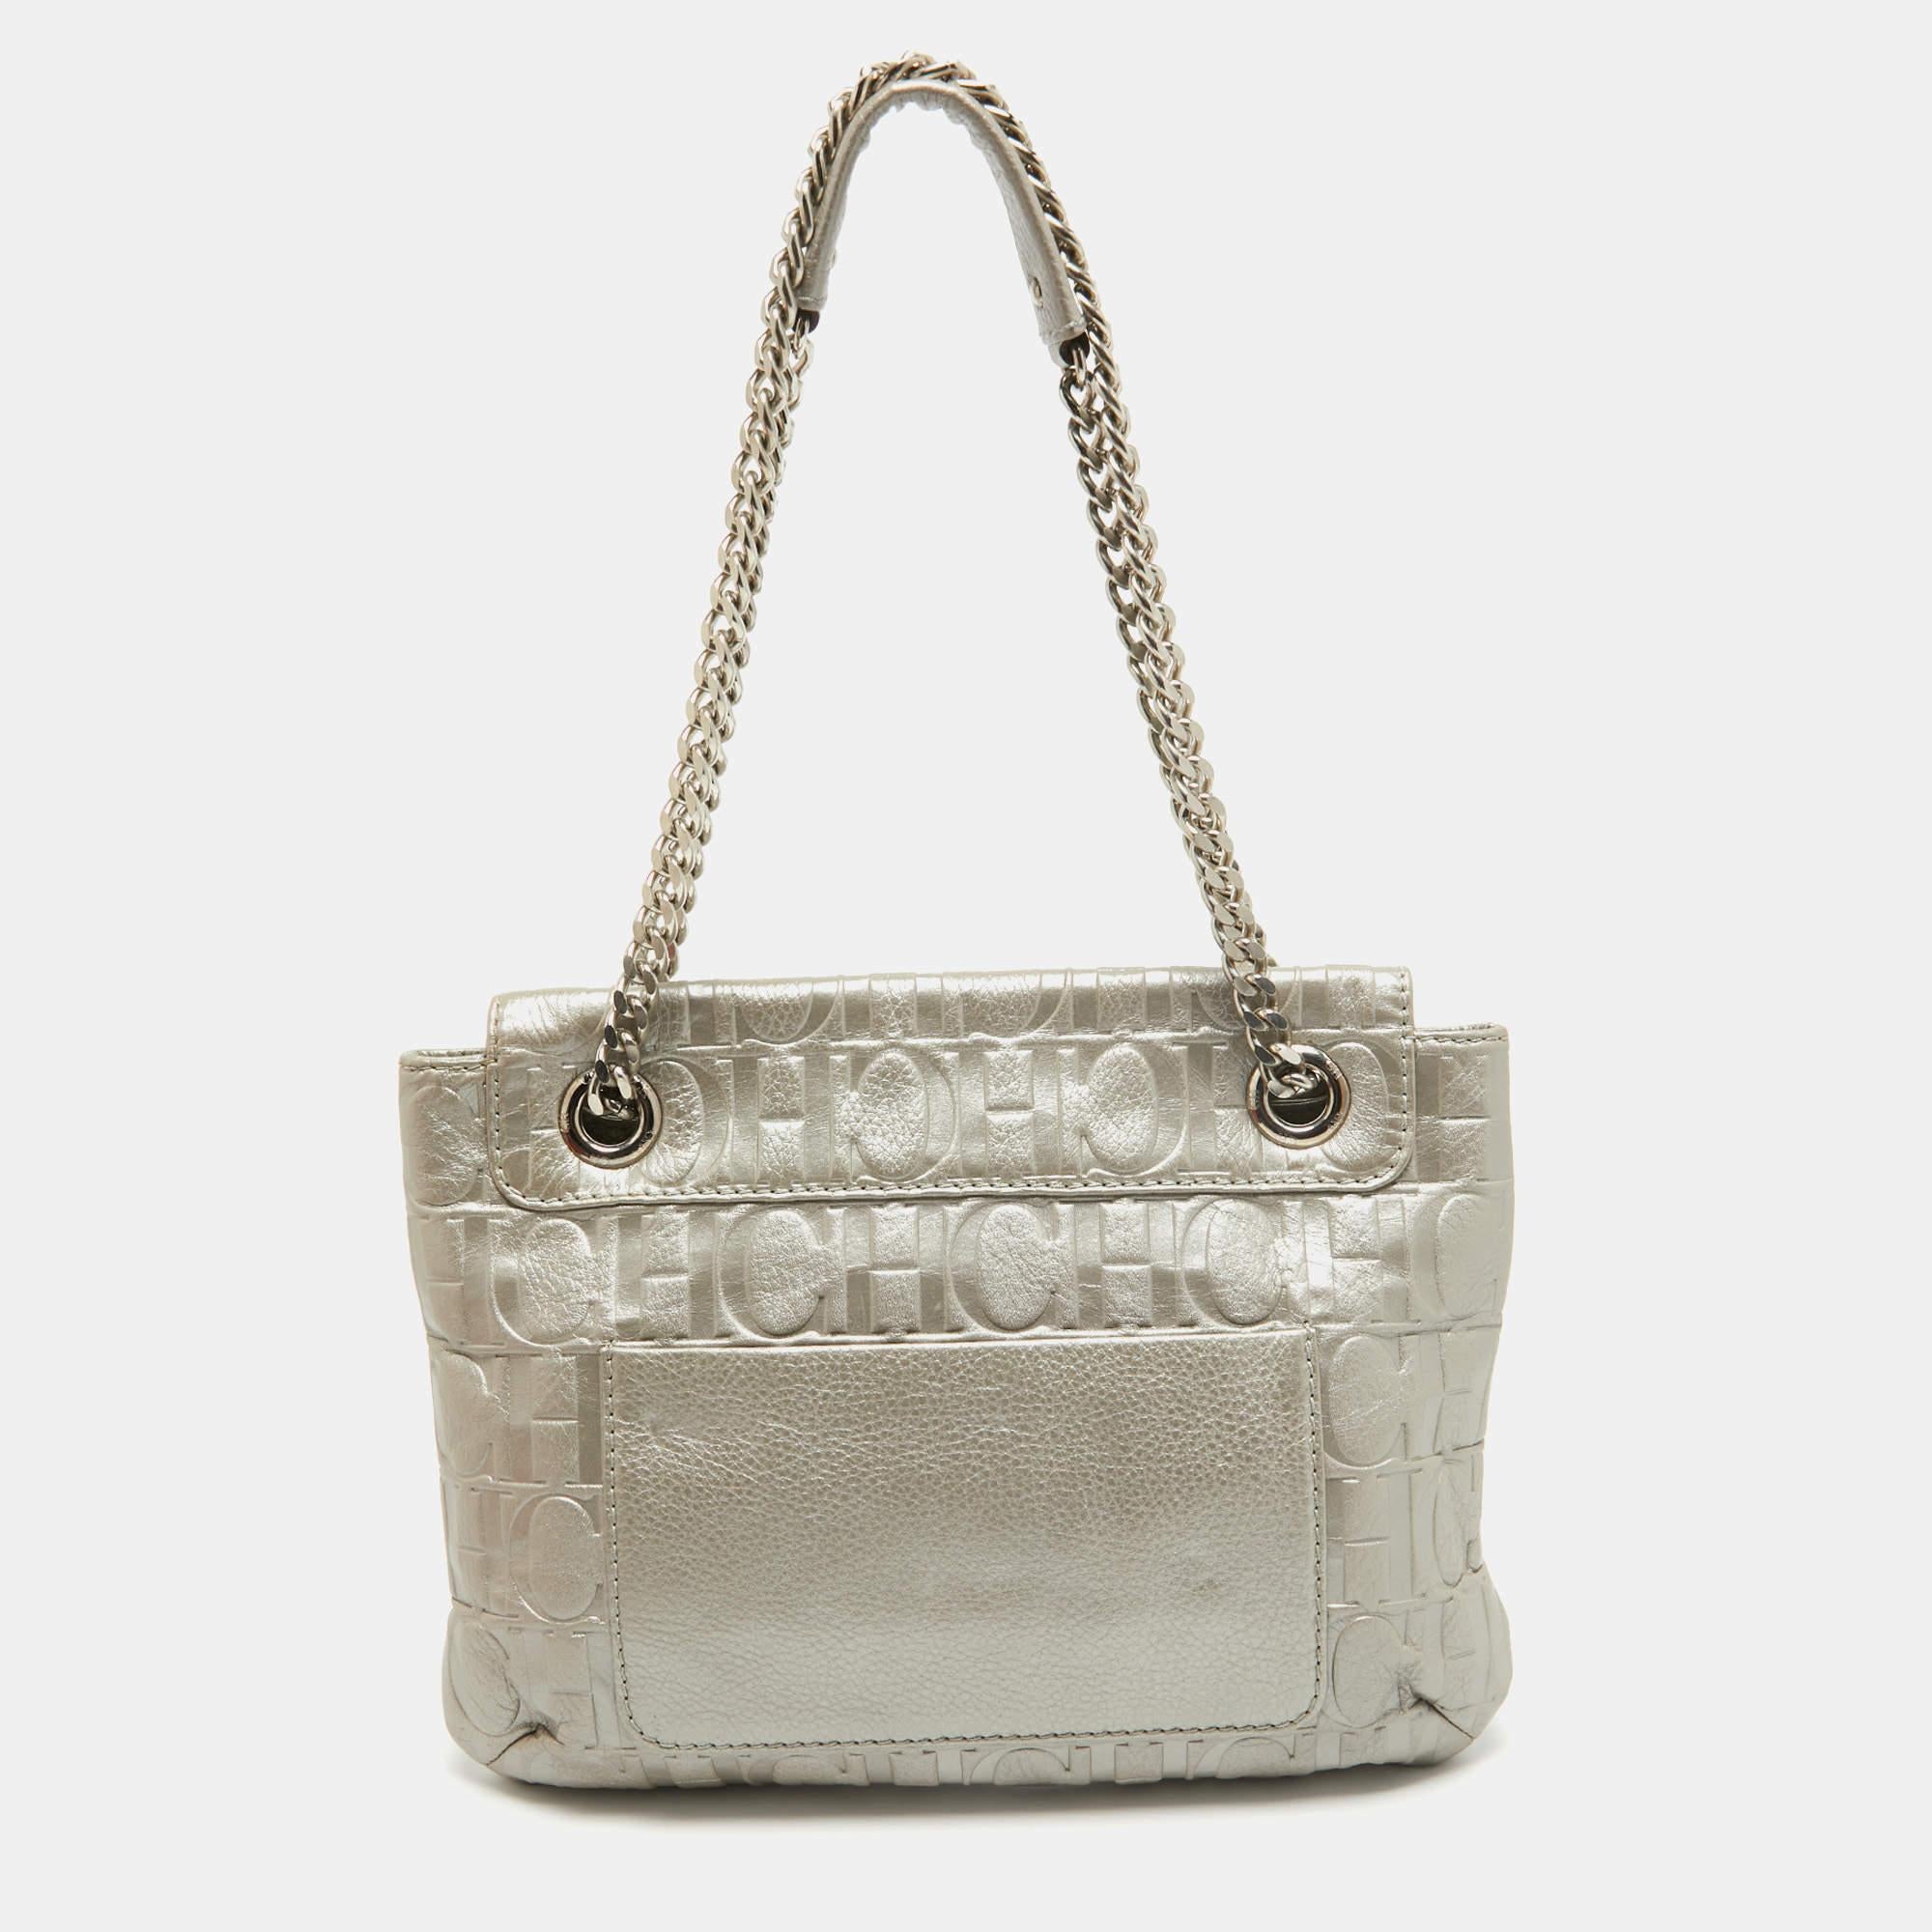 Structured, sophisticated, and stylish are some words that describe this shoulder bag! Crafted from the best quality material, the creation is adorned with the label's signature appeal and equipped with a well-spaced interior. Carry it to parties or